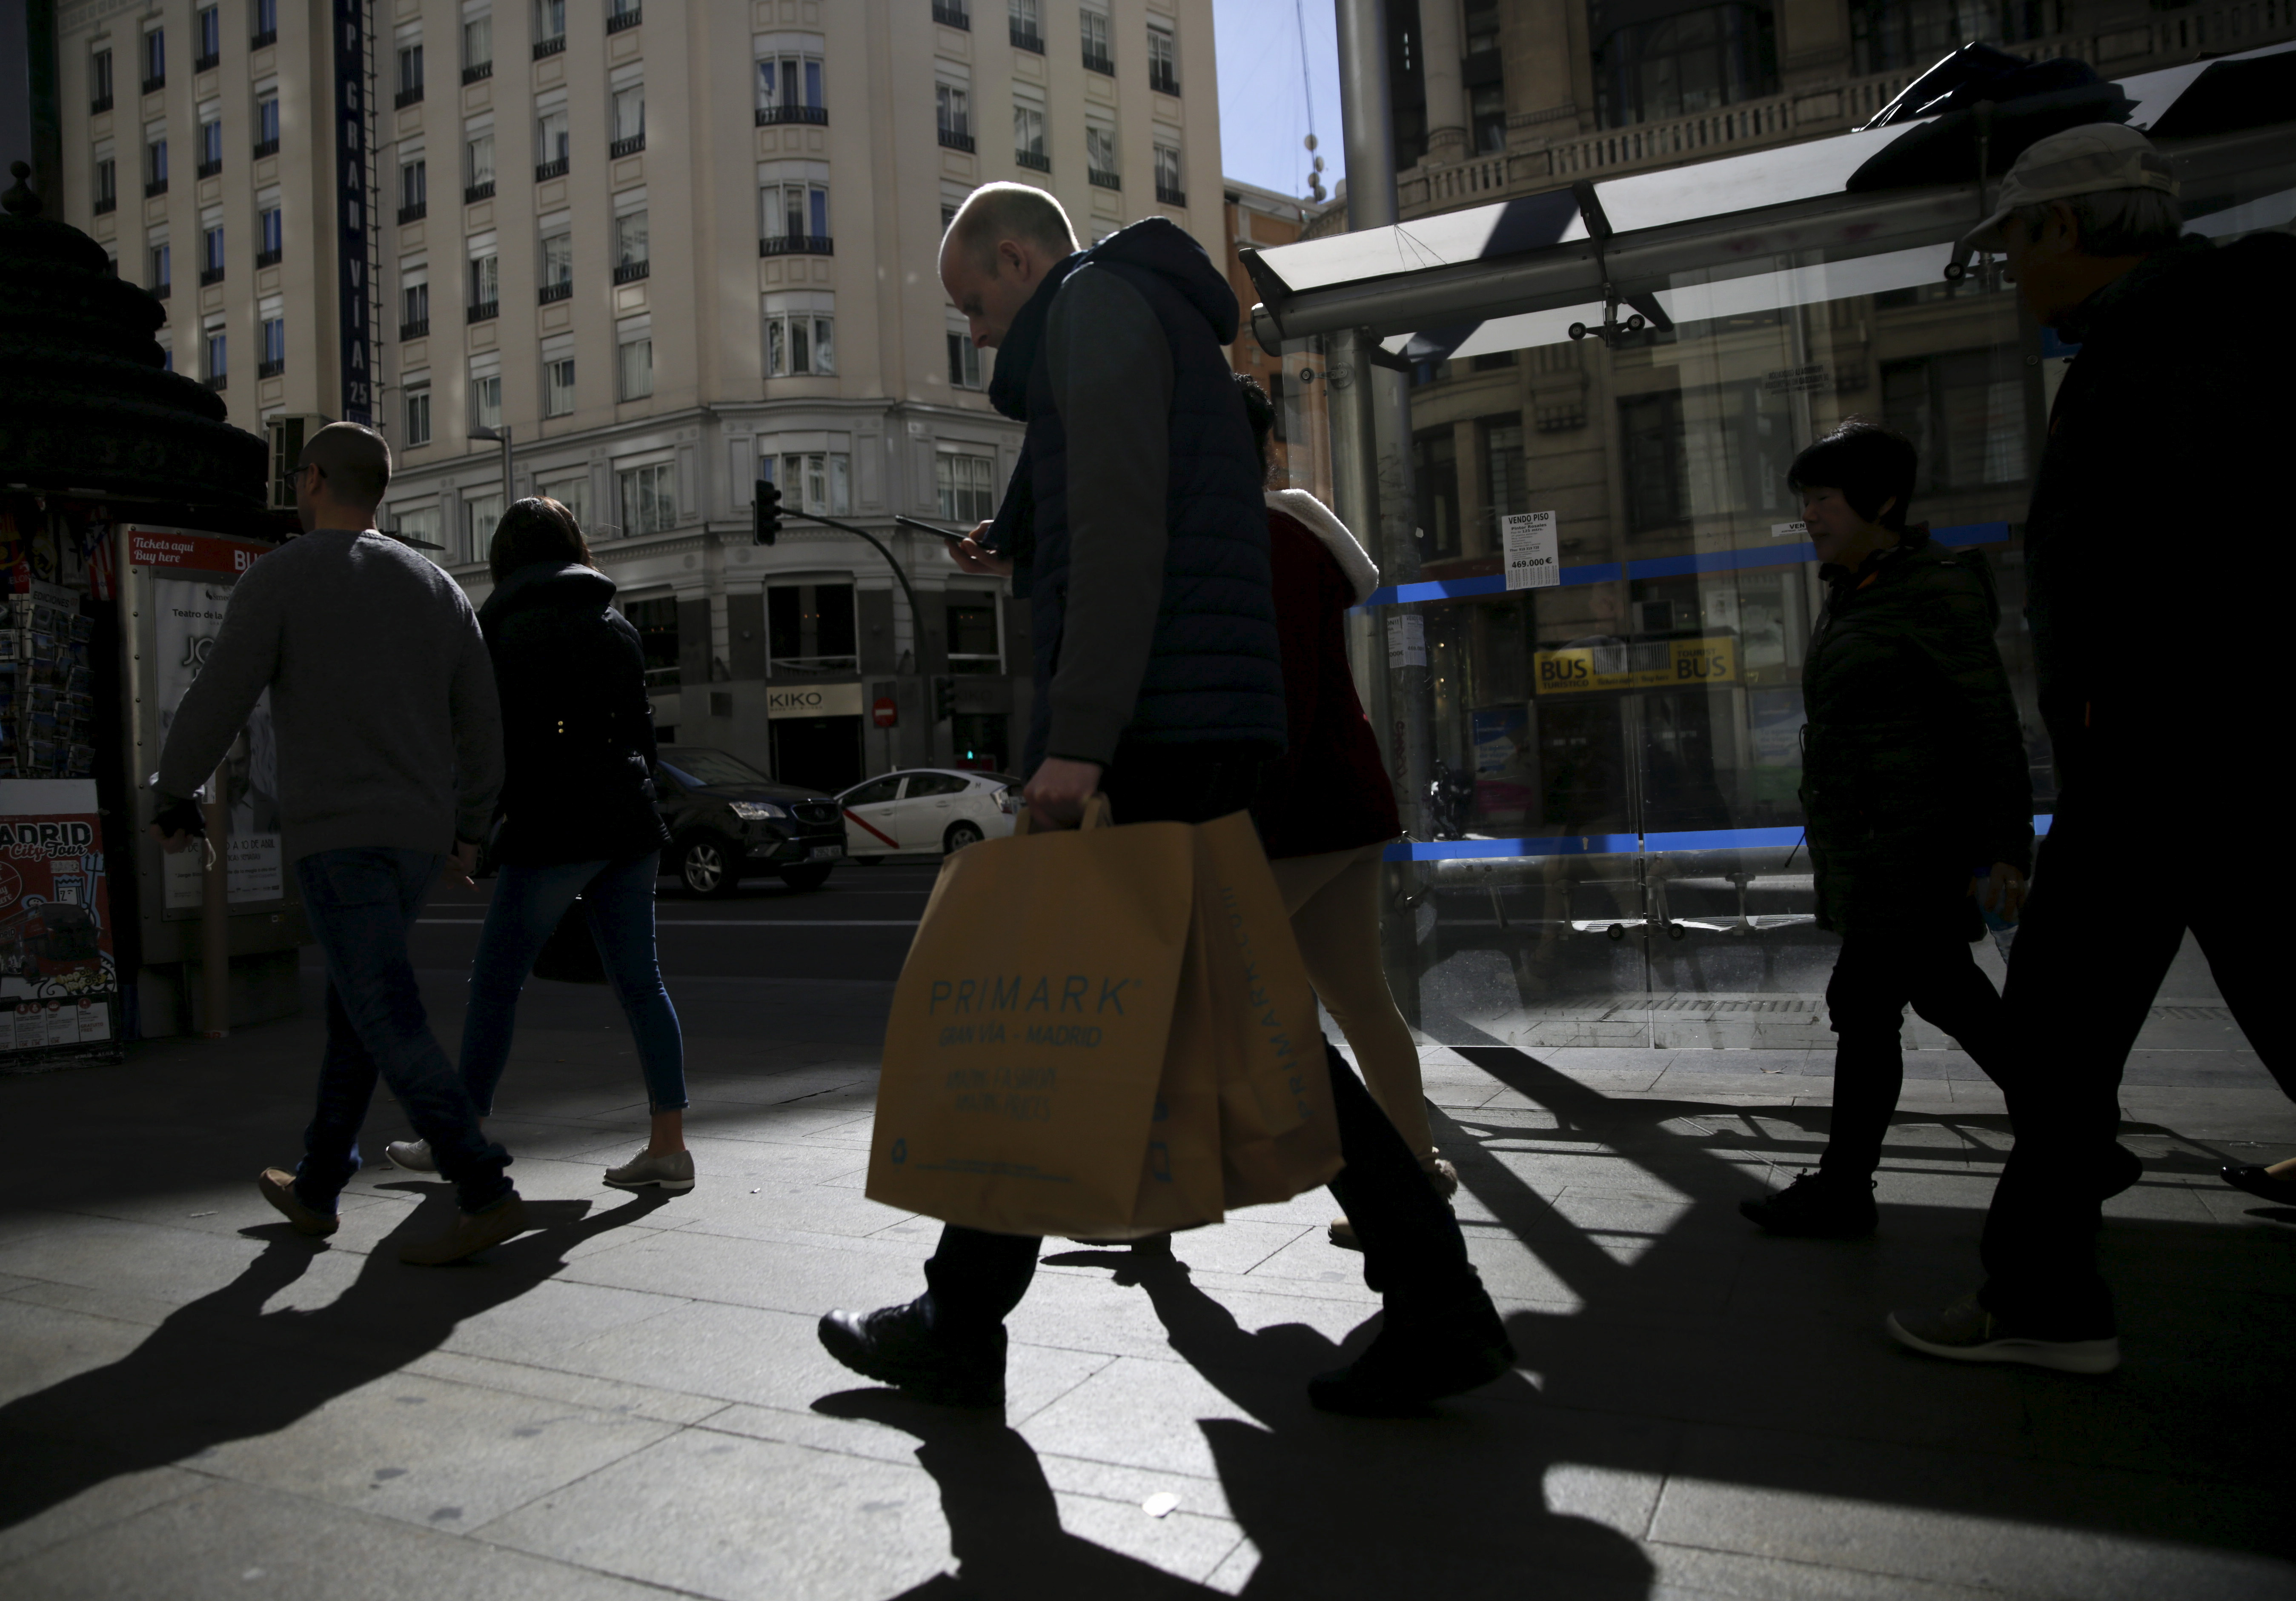 People carry shopping bags at a shopping district in Madrid, Spain